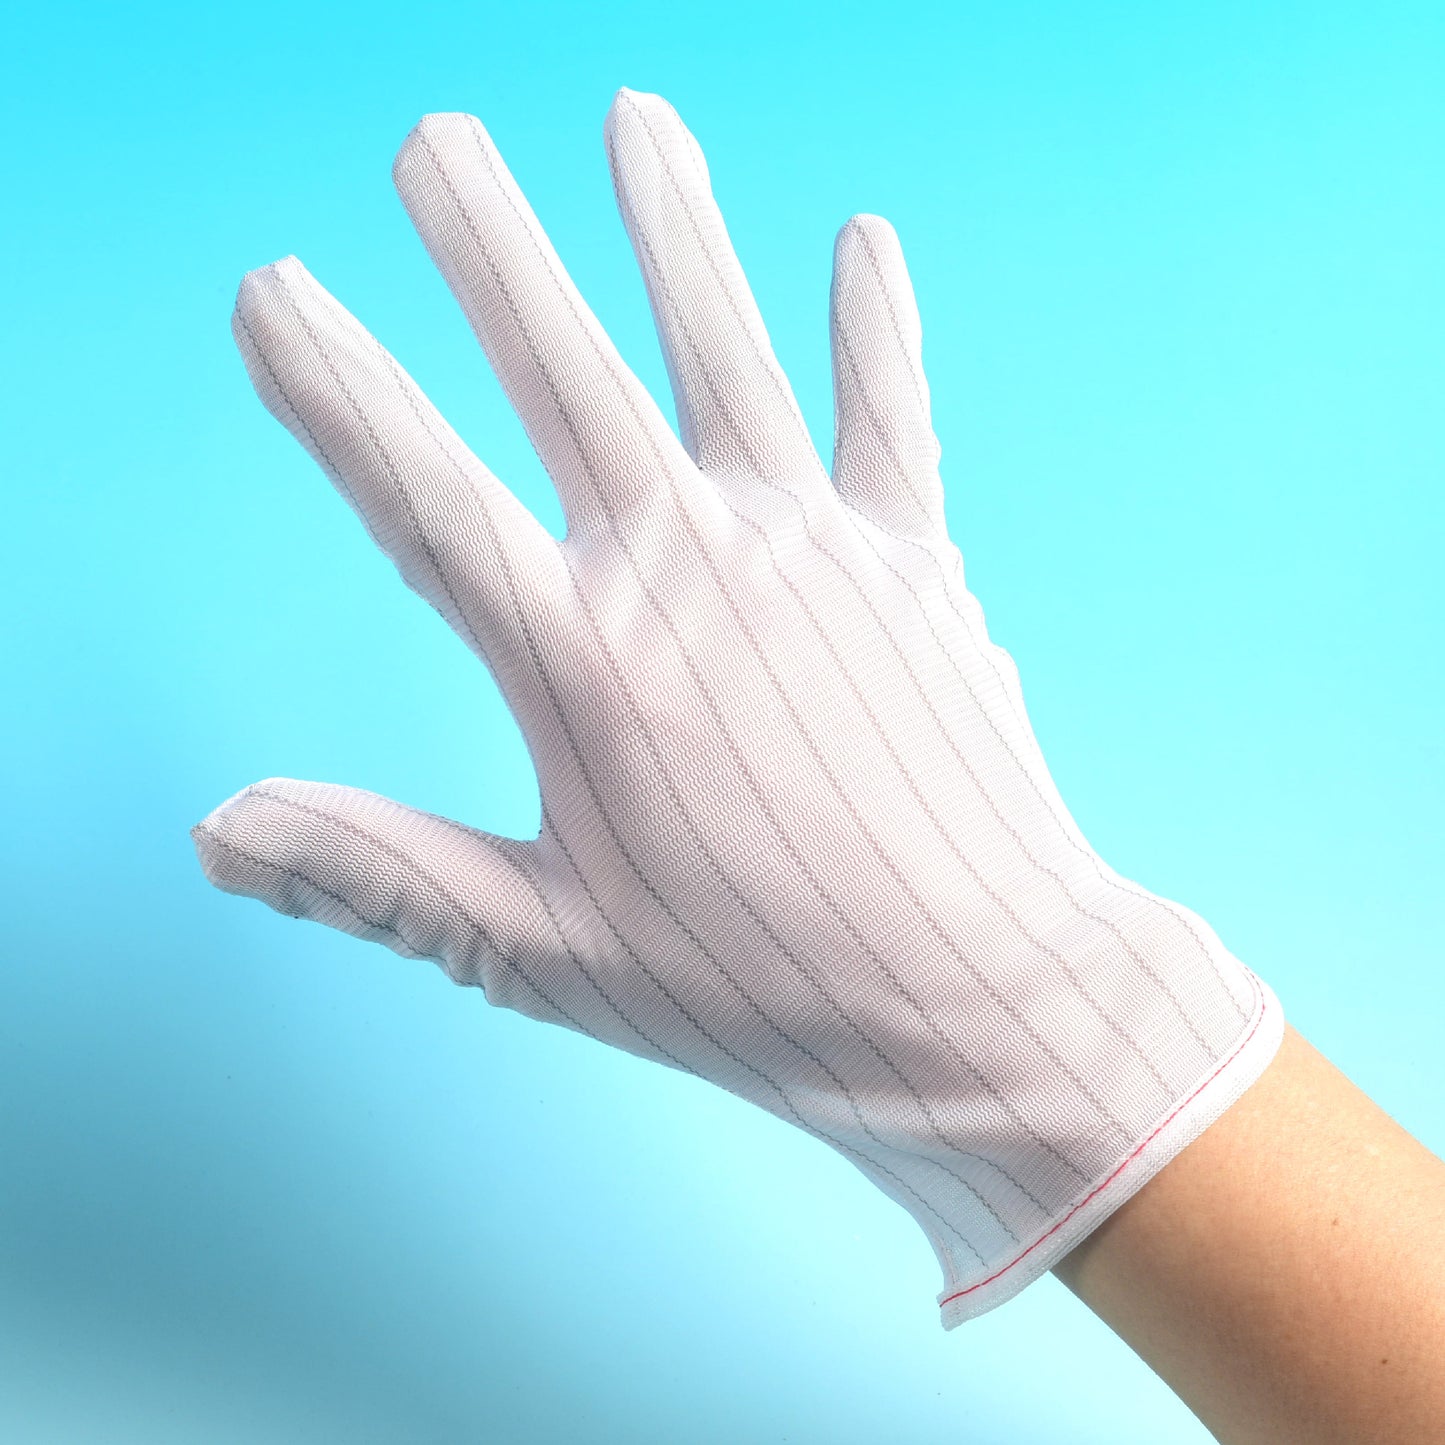 Double sided striped polyester conductive fiber electronic factory anti-static gloves ESD GLOVES 10 pairs